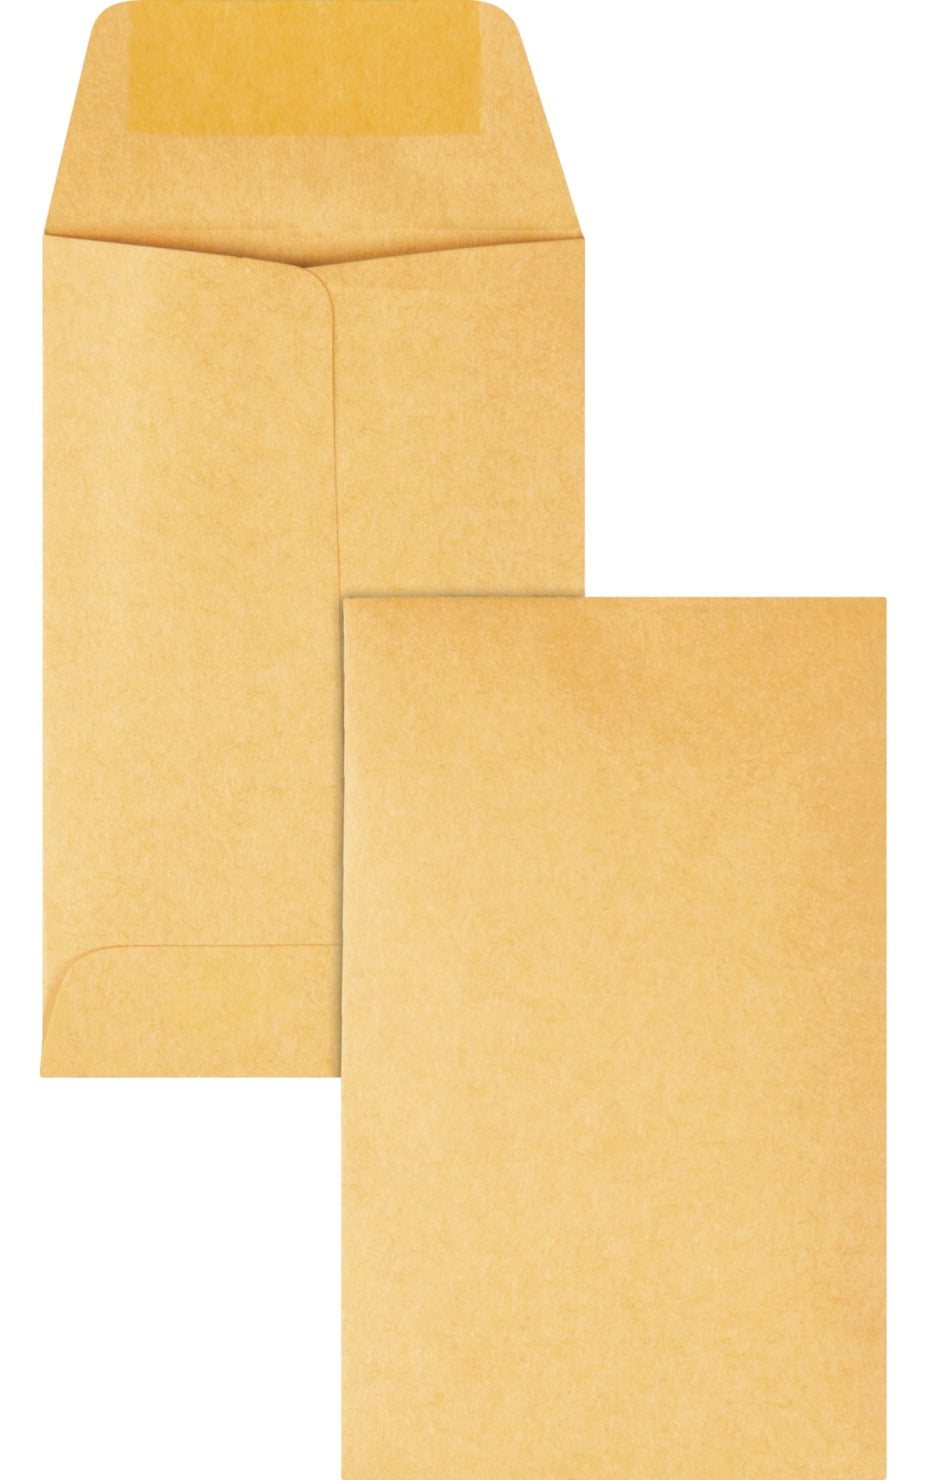 Credit Cards 3.125 x 5.5 inches Brown Kraft Envelopes Classic Small Parts Envelopes with Self Adhesive Gummed Flap for Coins Seeds Cash Xxcxpark 500 PCS #5 Coin Envelopes